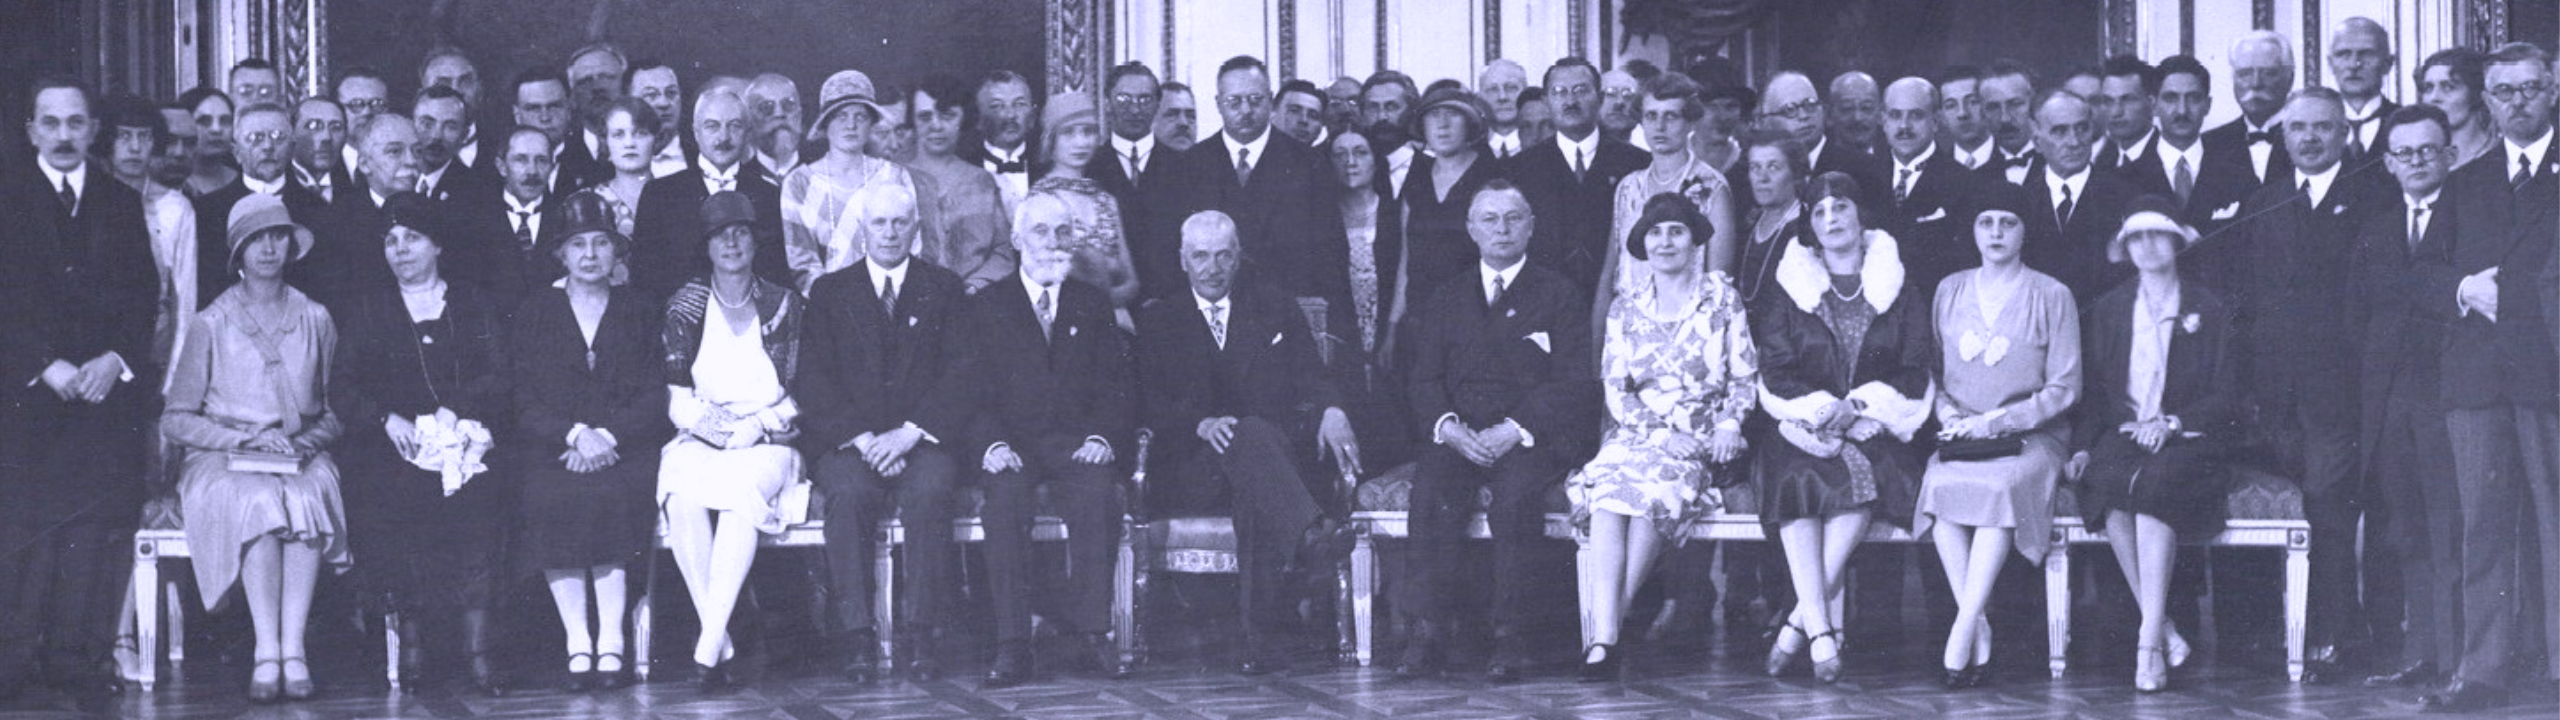 isi-meeting-1920s